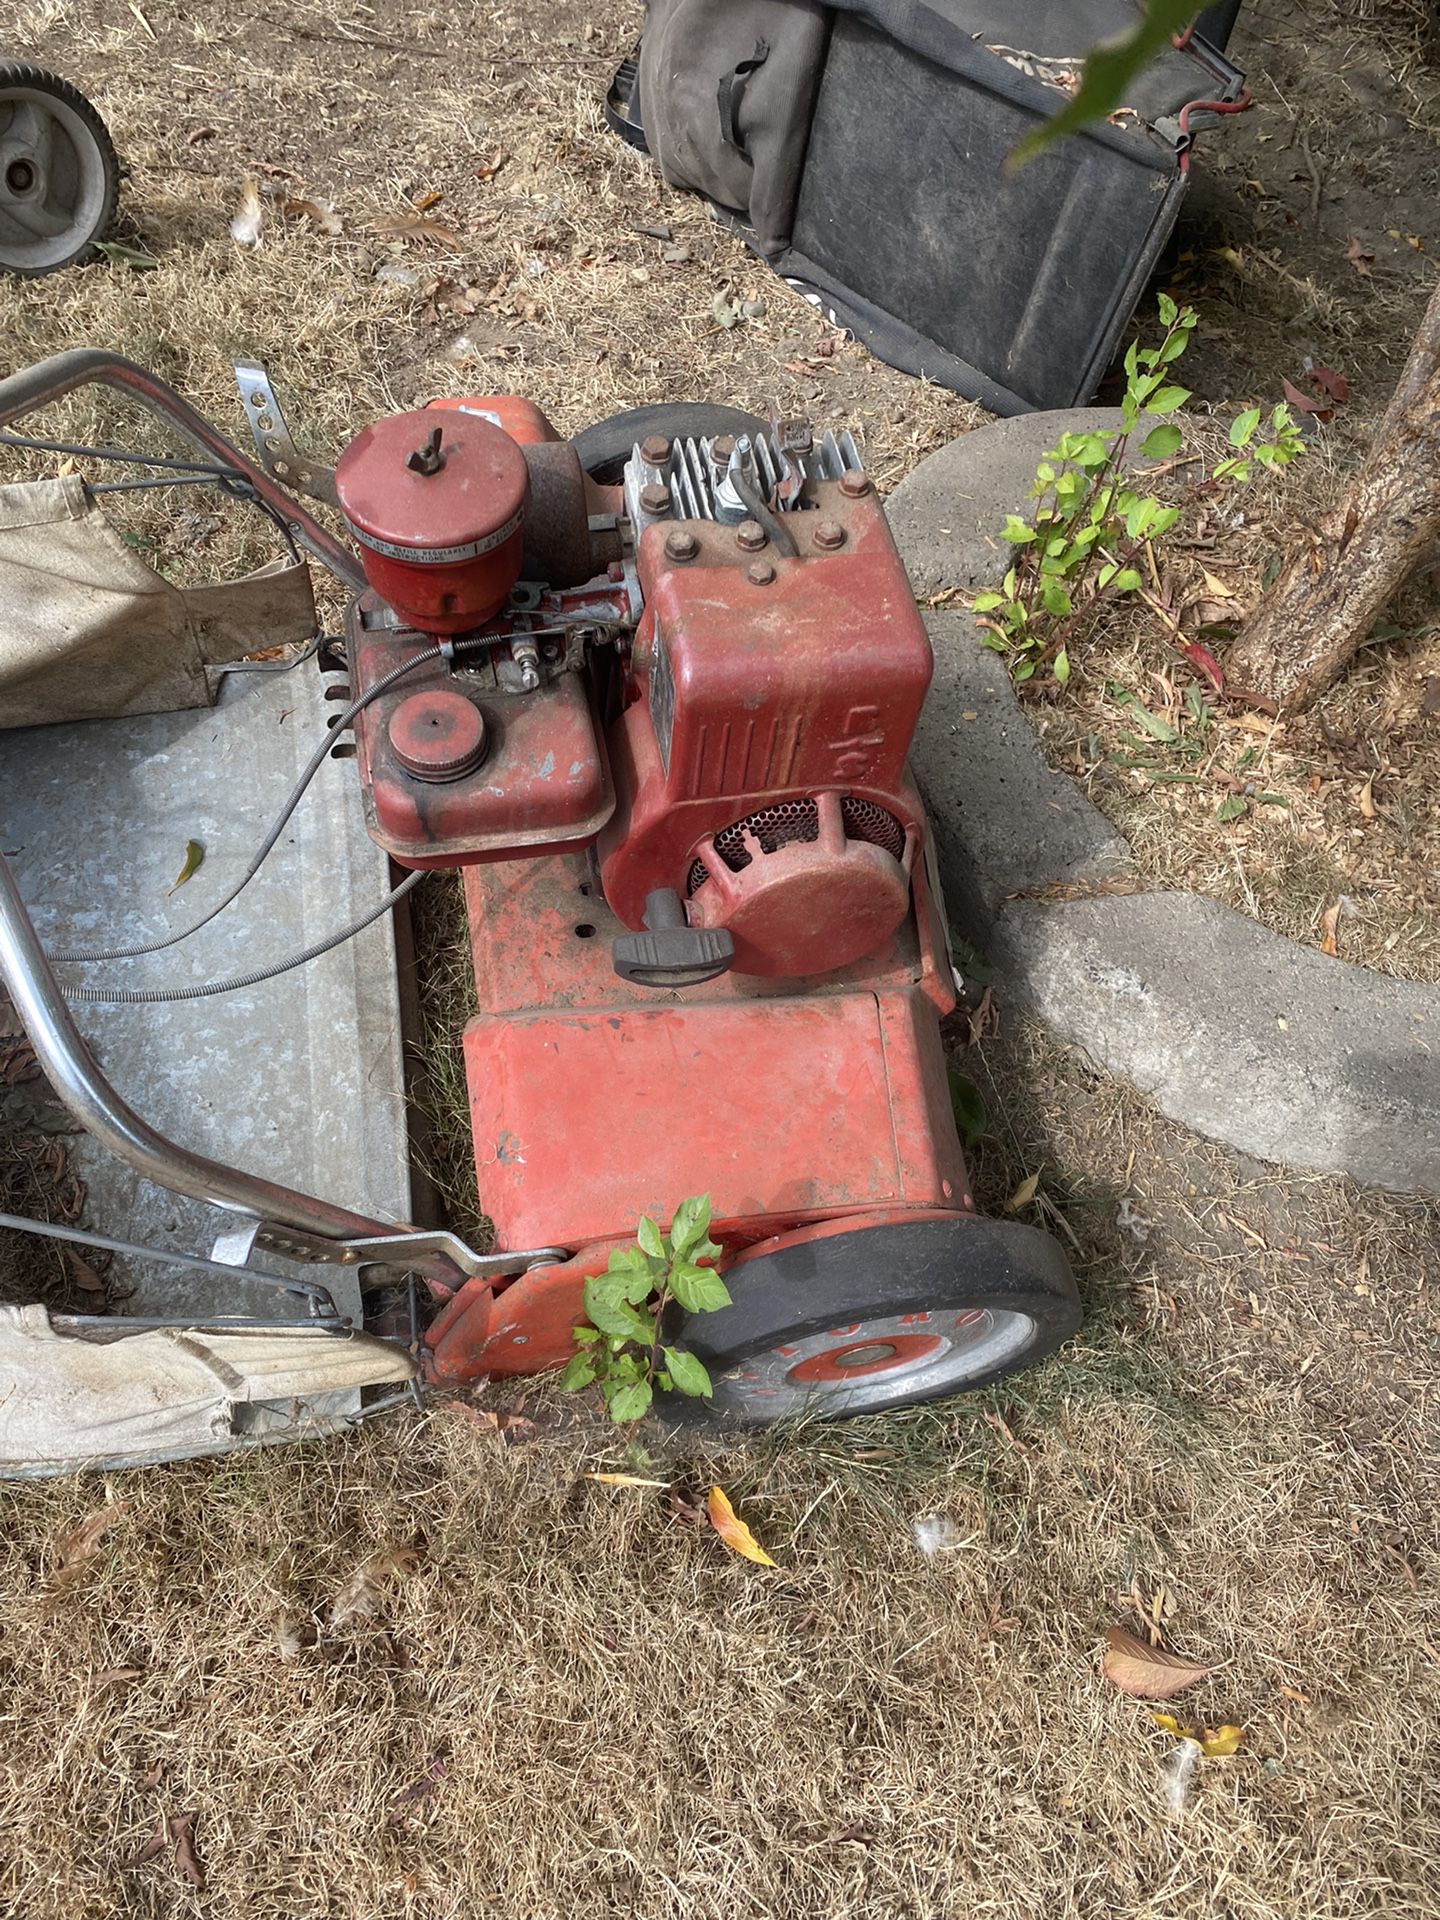 Toro lawn Mower Was running but needs new gas been sitting for a while